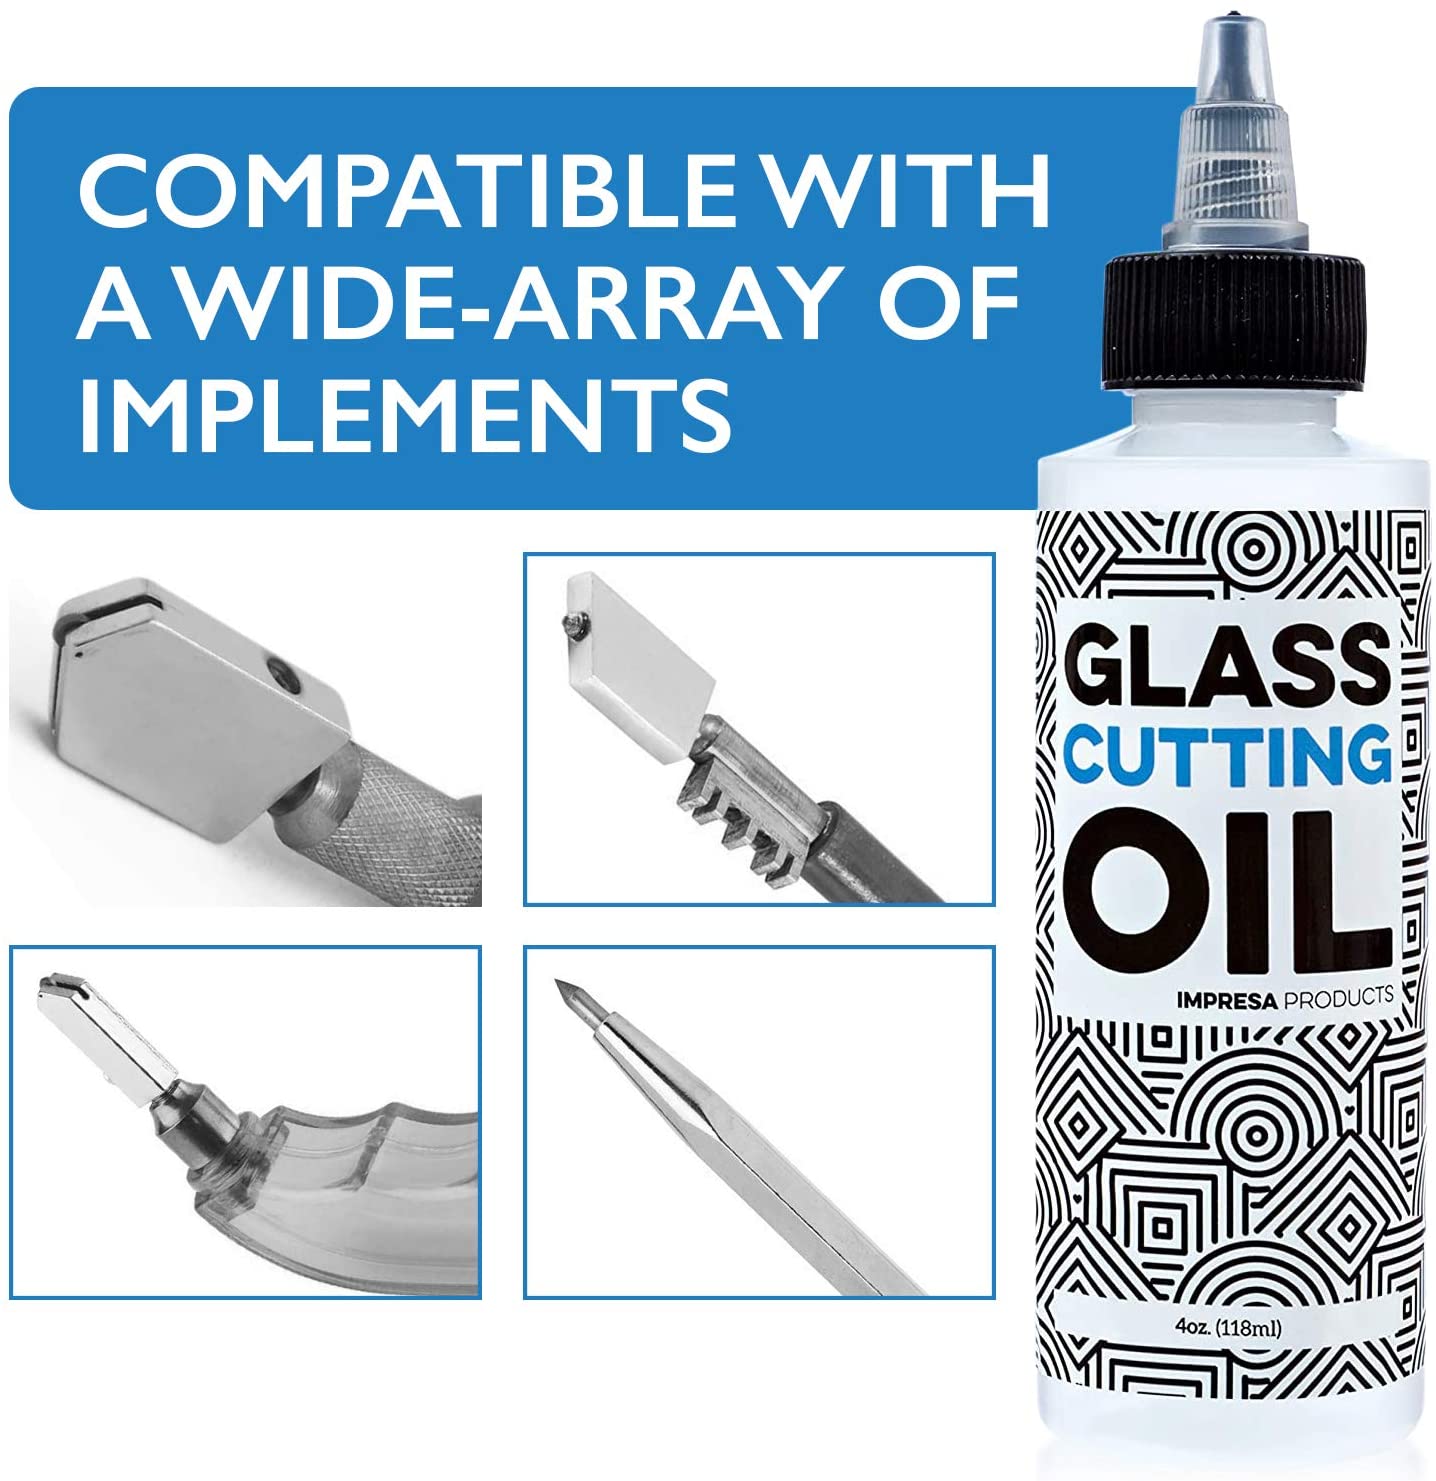 Glass Cutting Oil For Auto Cutters - Ontario Glazing Supplies